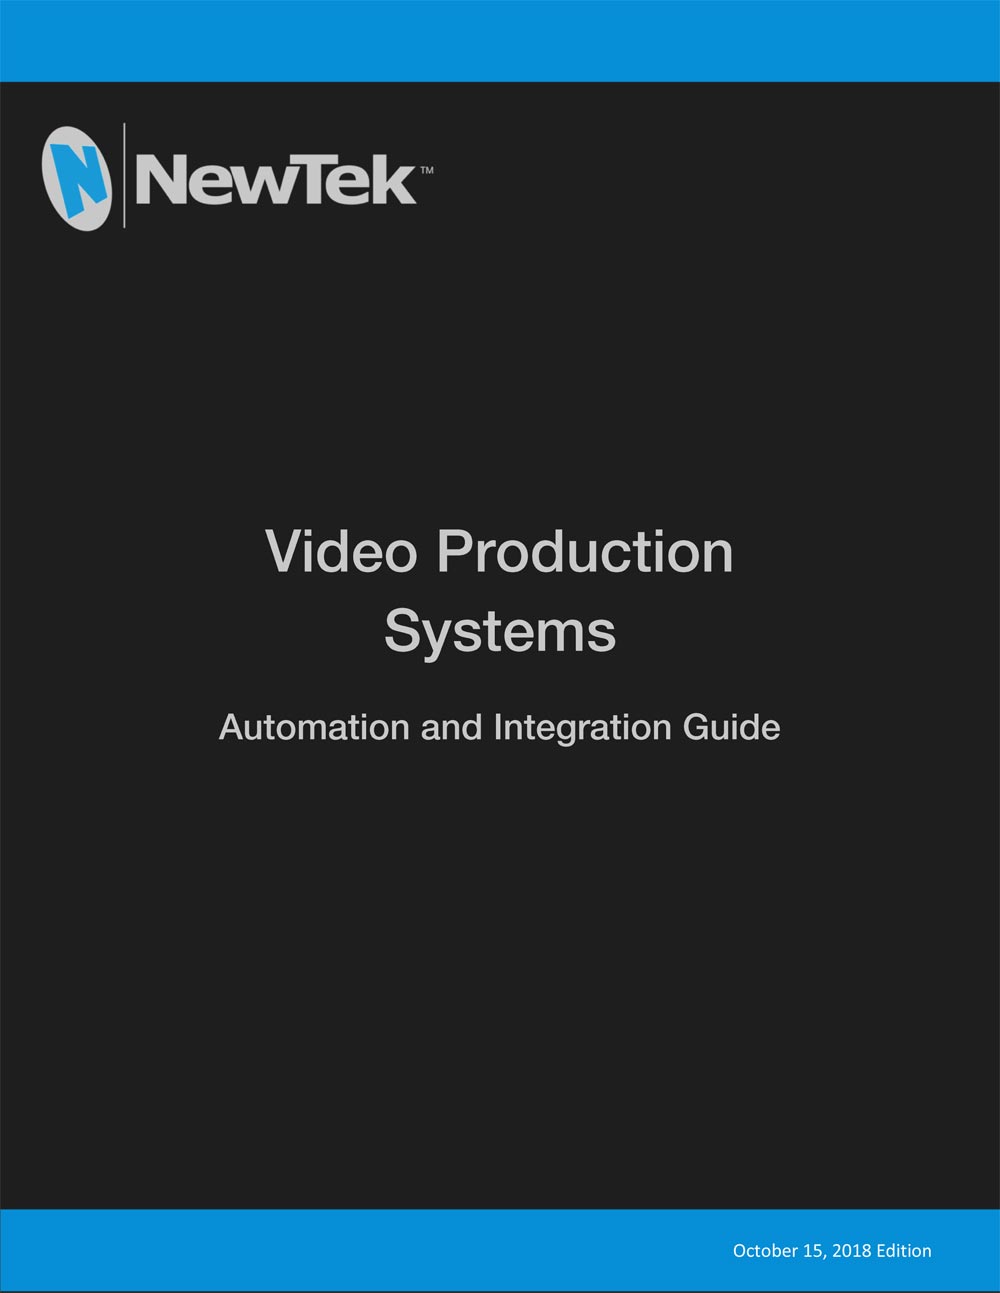 NEWTEK AUTOMATION AND INTEGRATION GUIDE 2018/10